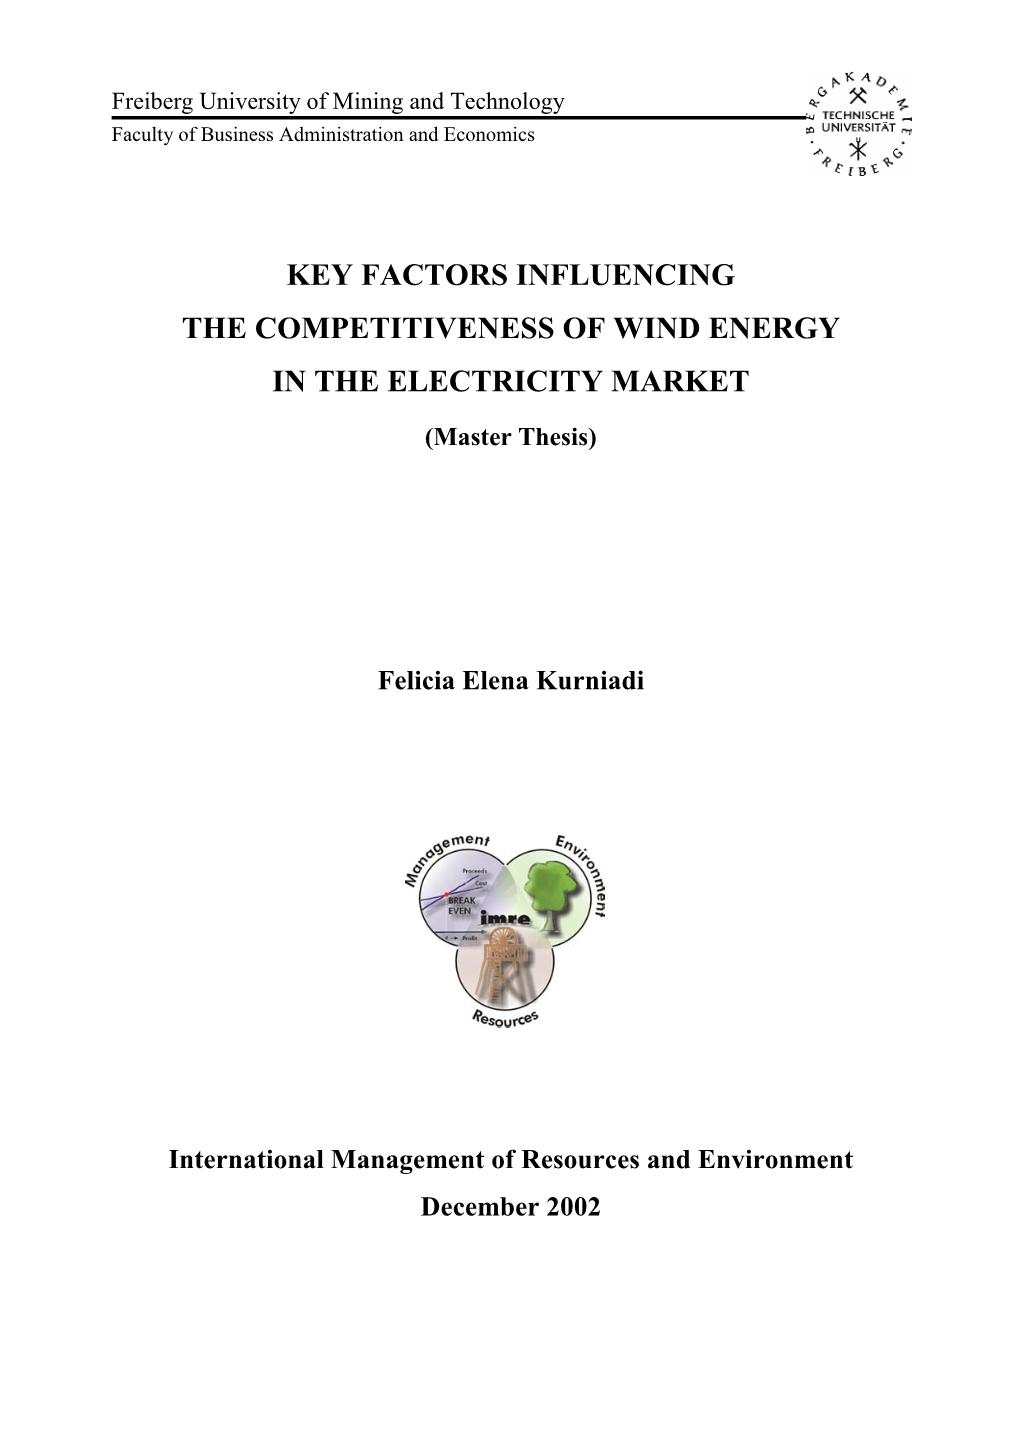 Key Factors Influencing the Competitiveness of Wind Energy in the Electricity Market